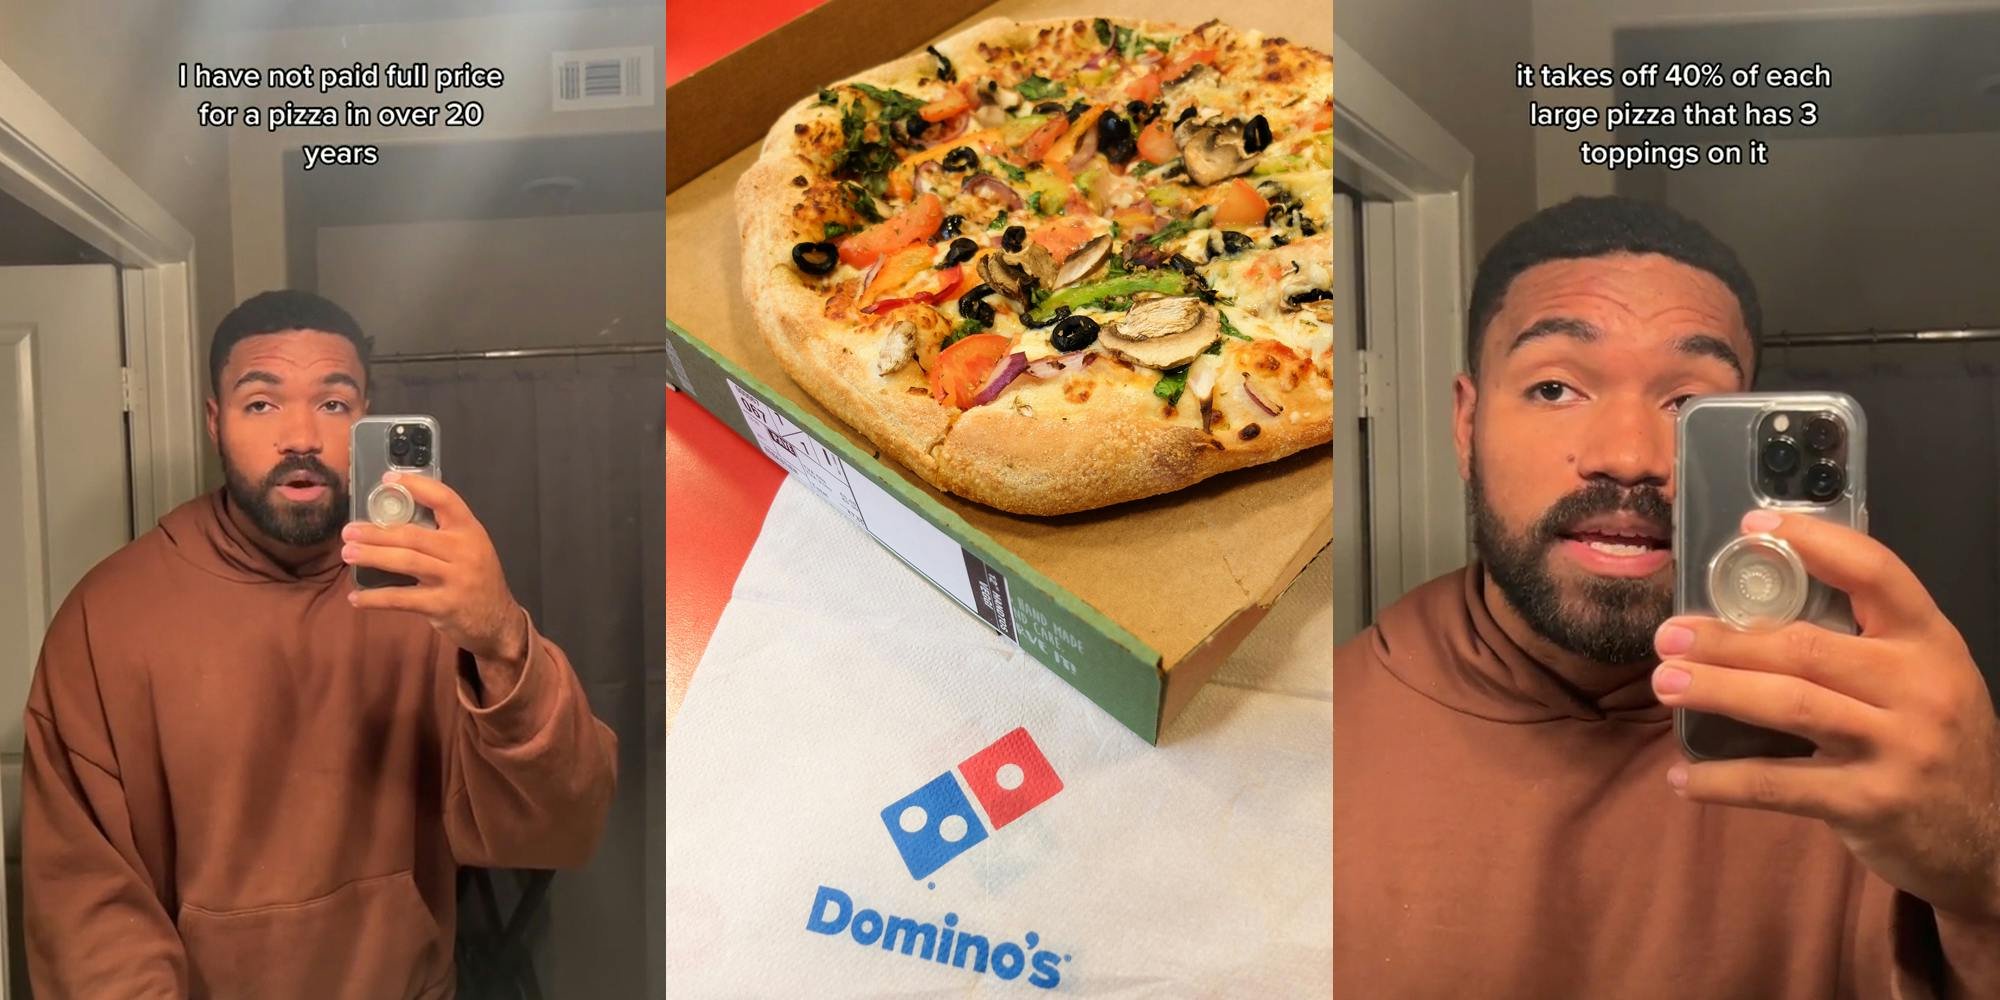 'I’m gonna use this the next time': Domino's customer says he hasn't paid full price for a pizza in over 20 years. Does his hack actually work?